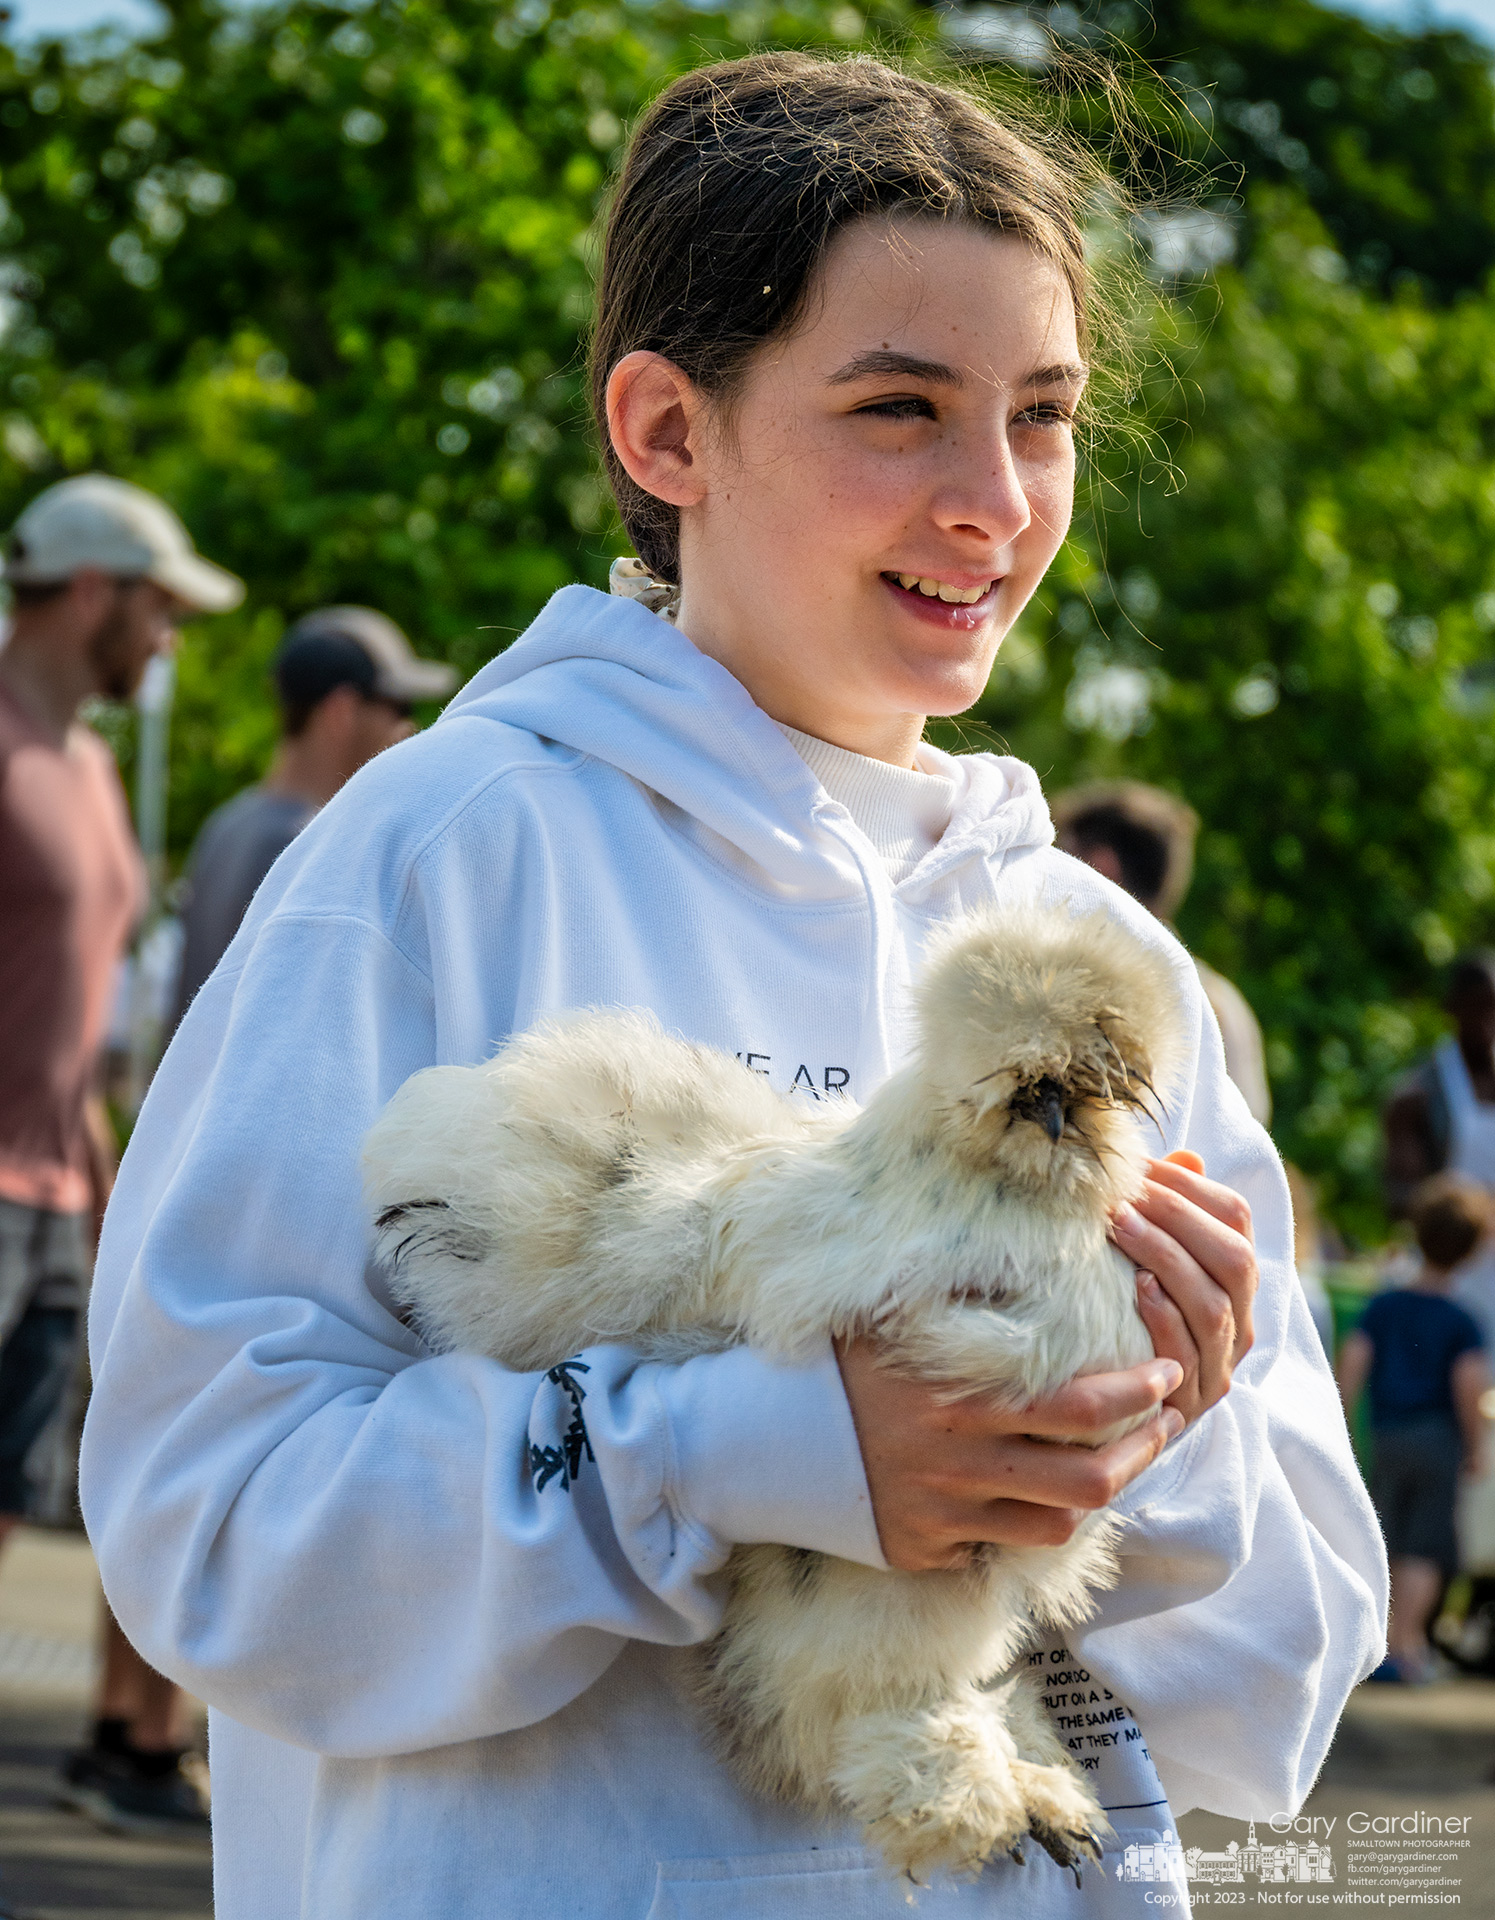 A young girl carries her silky chicken as she shops with her mother and brother at the Saturday Farmers Market in Uptown Westerville. My Final Photo for June 3, 2023.